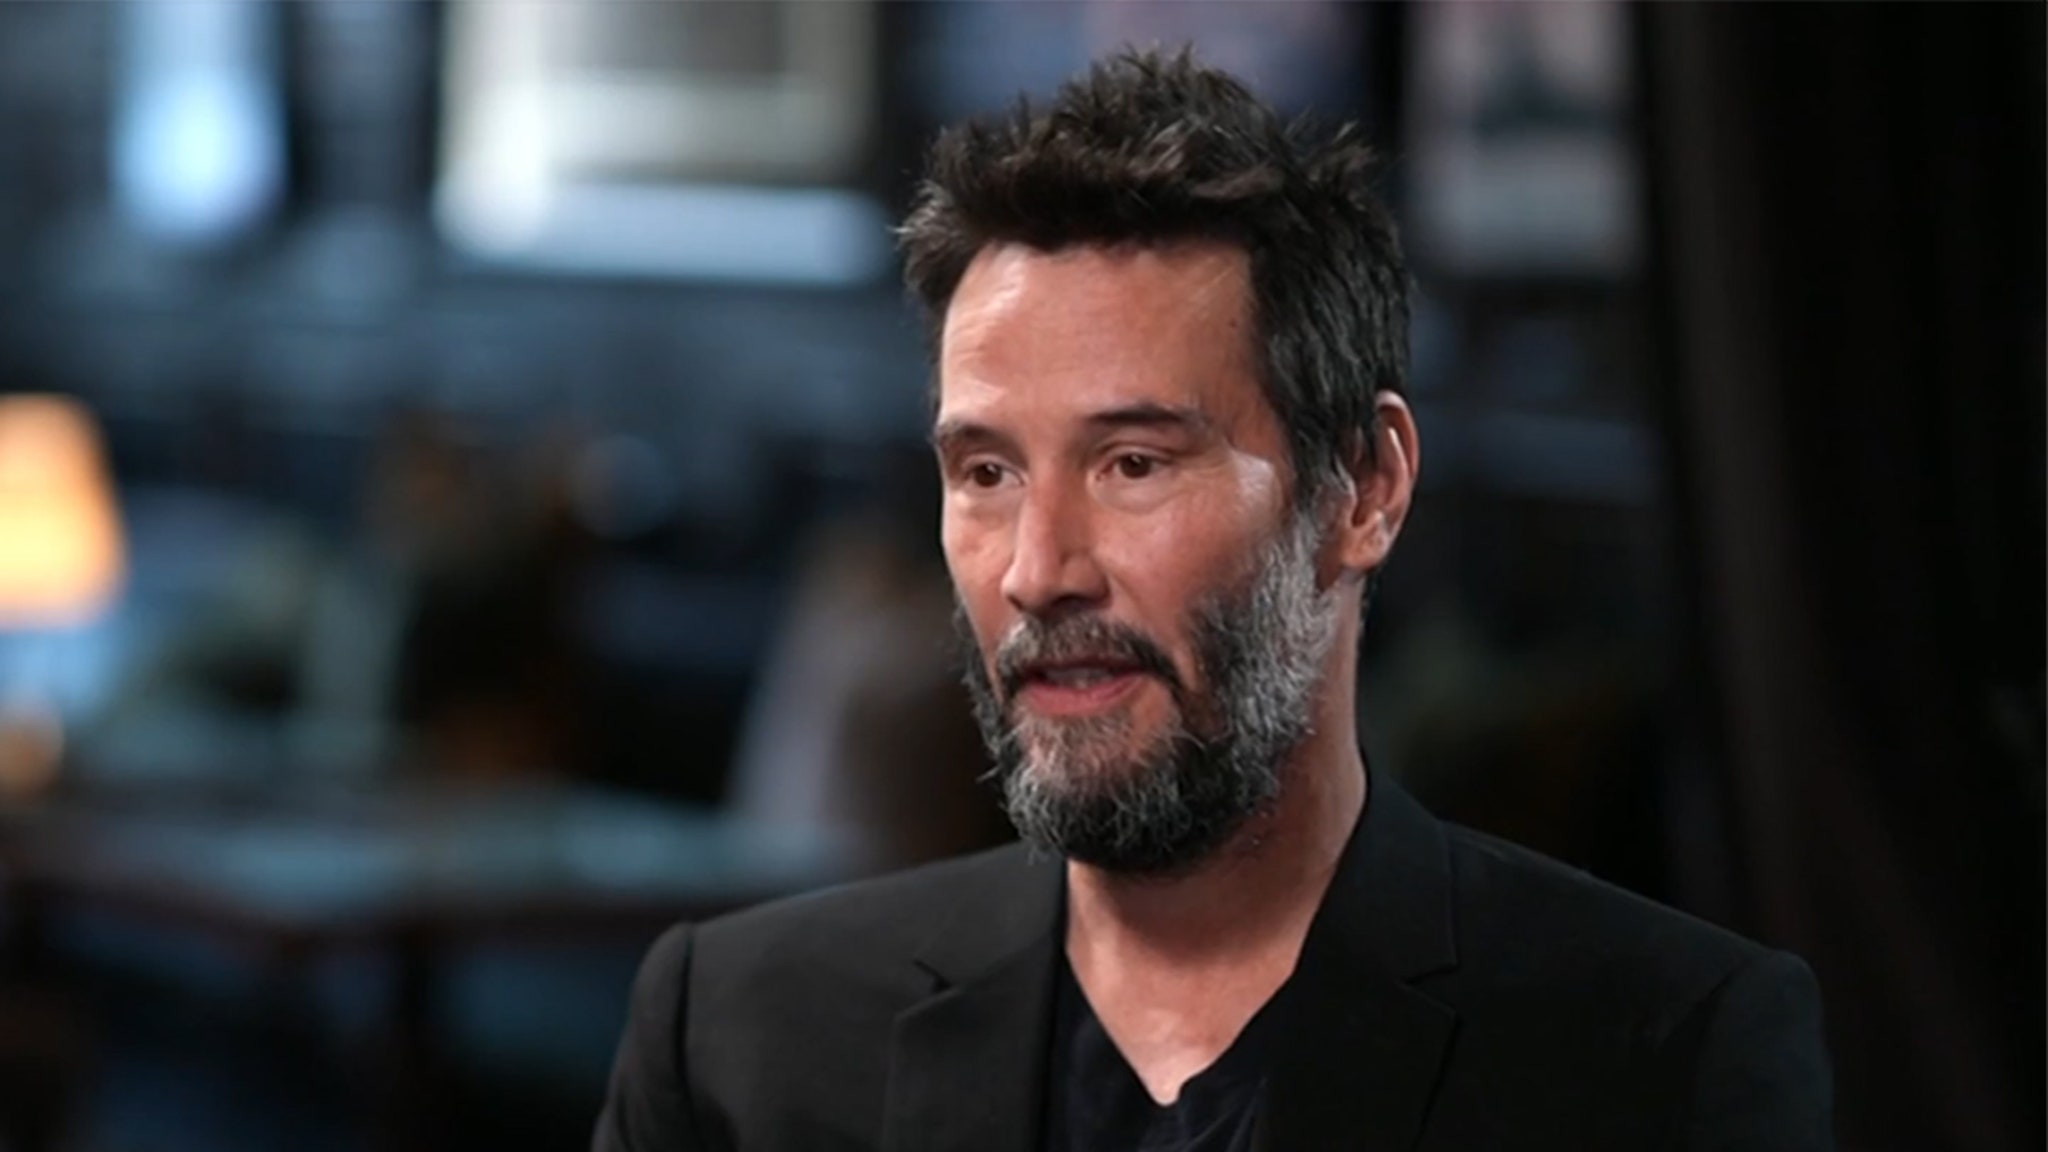 Keanu Reeves Says He Thinks About Death 'All the Time'